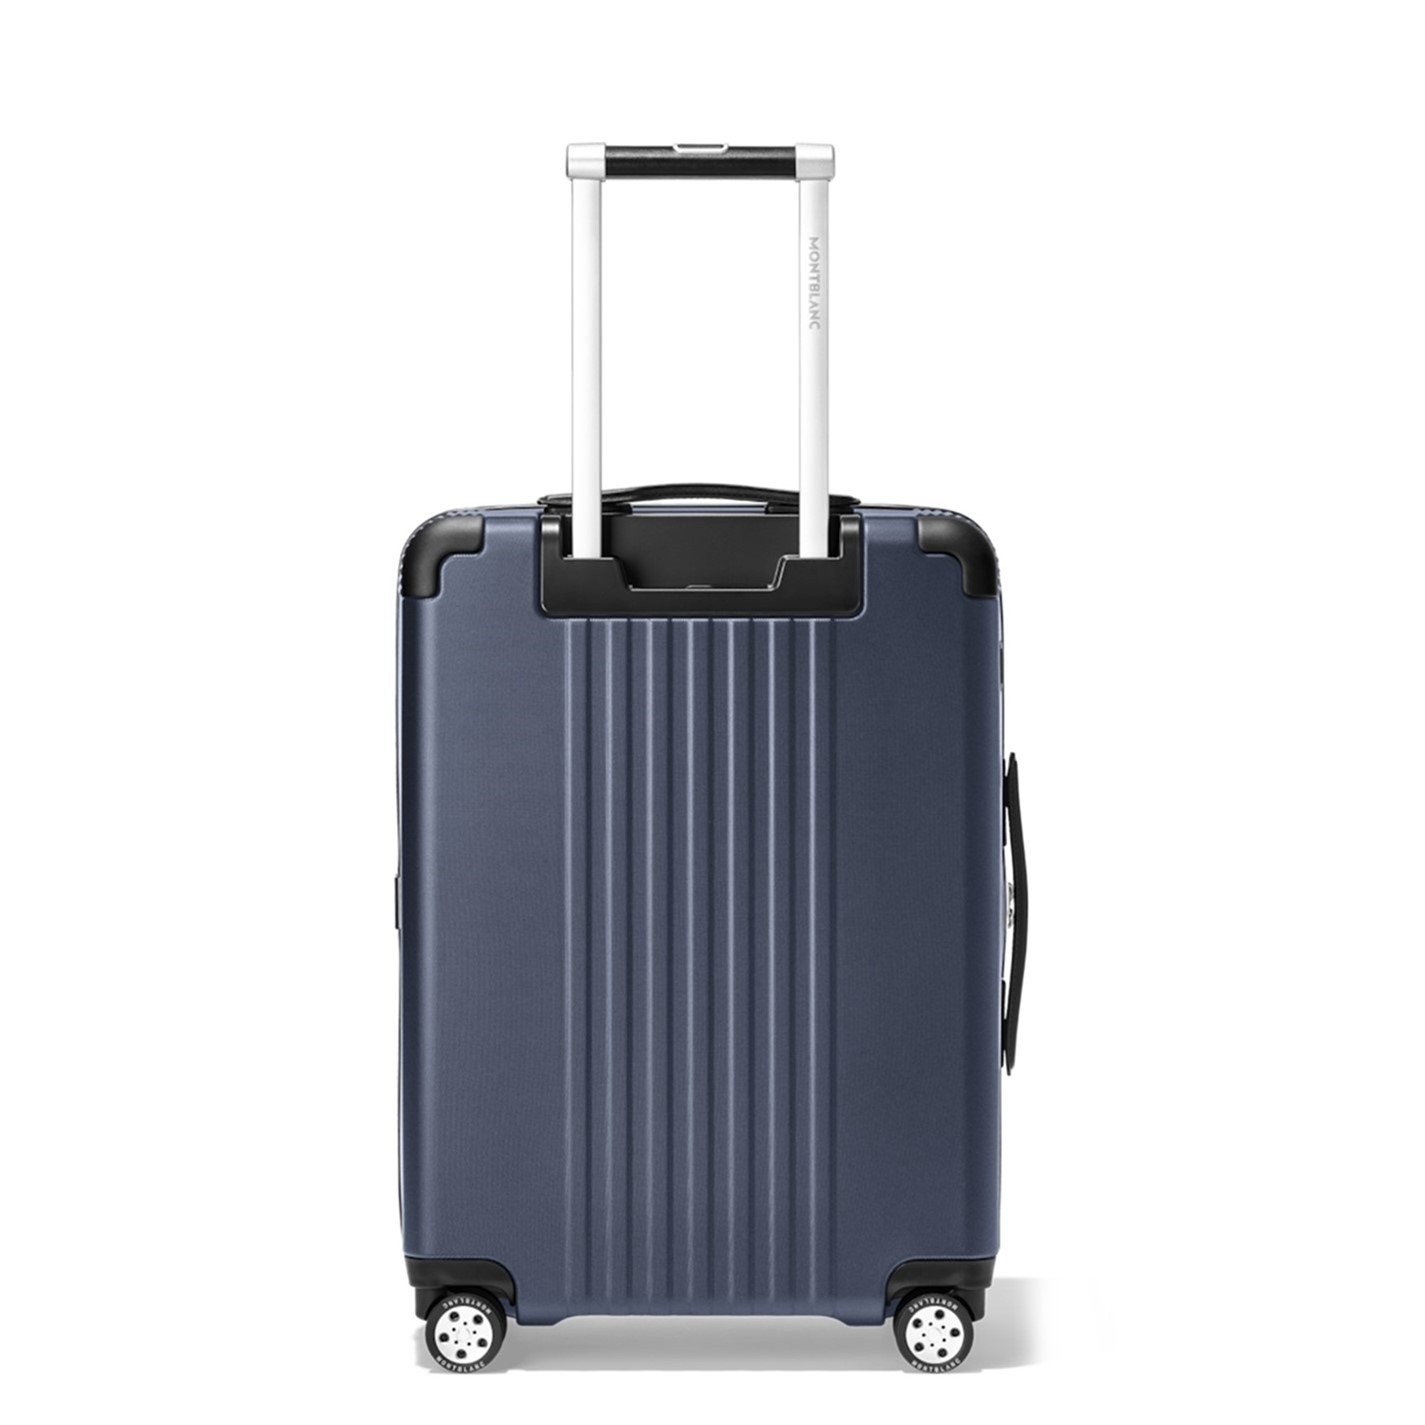 MB CABIN SUITCASE SN00 - 2